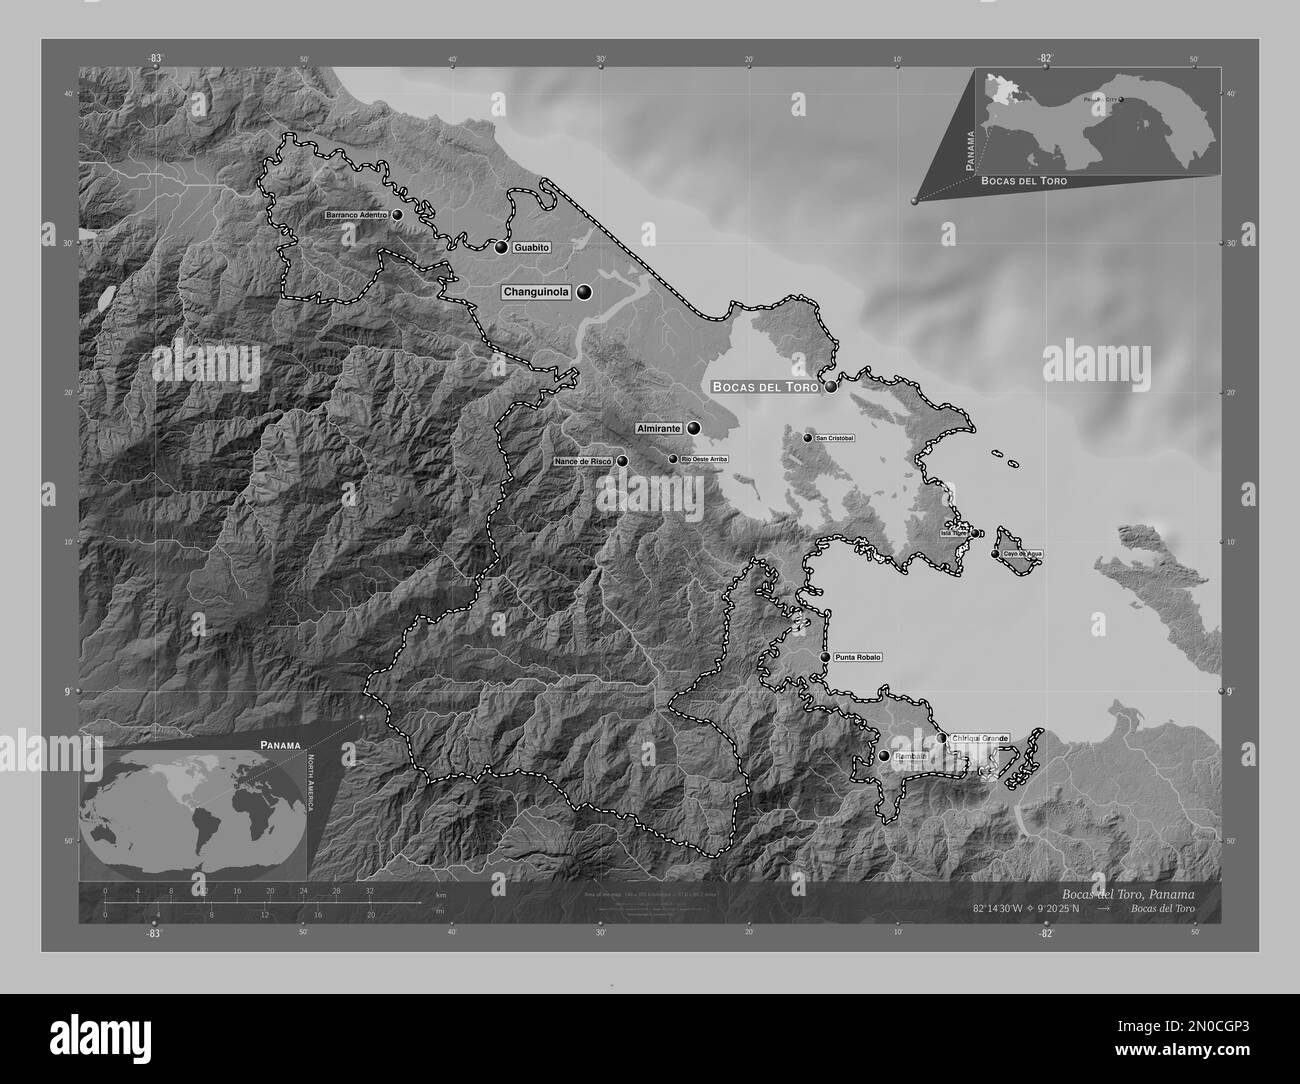 Bocas del Toro, province of Panama. Grayscale elevation map with lakes and rivers. Locations and names of major cities of the region. Corner auxiliary Stock Photo